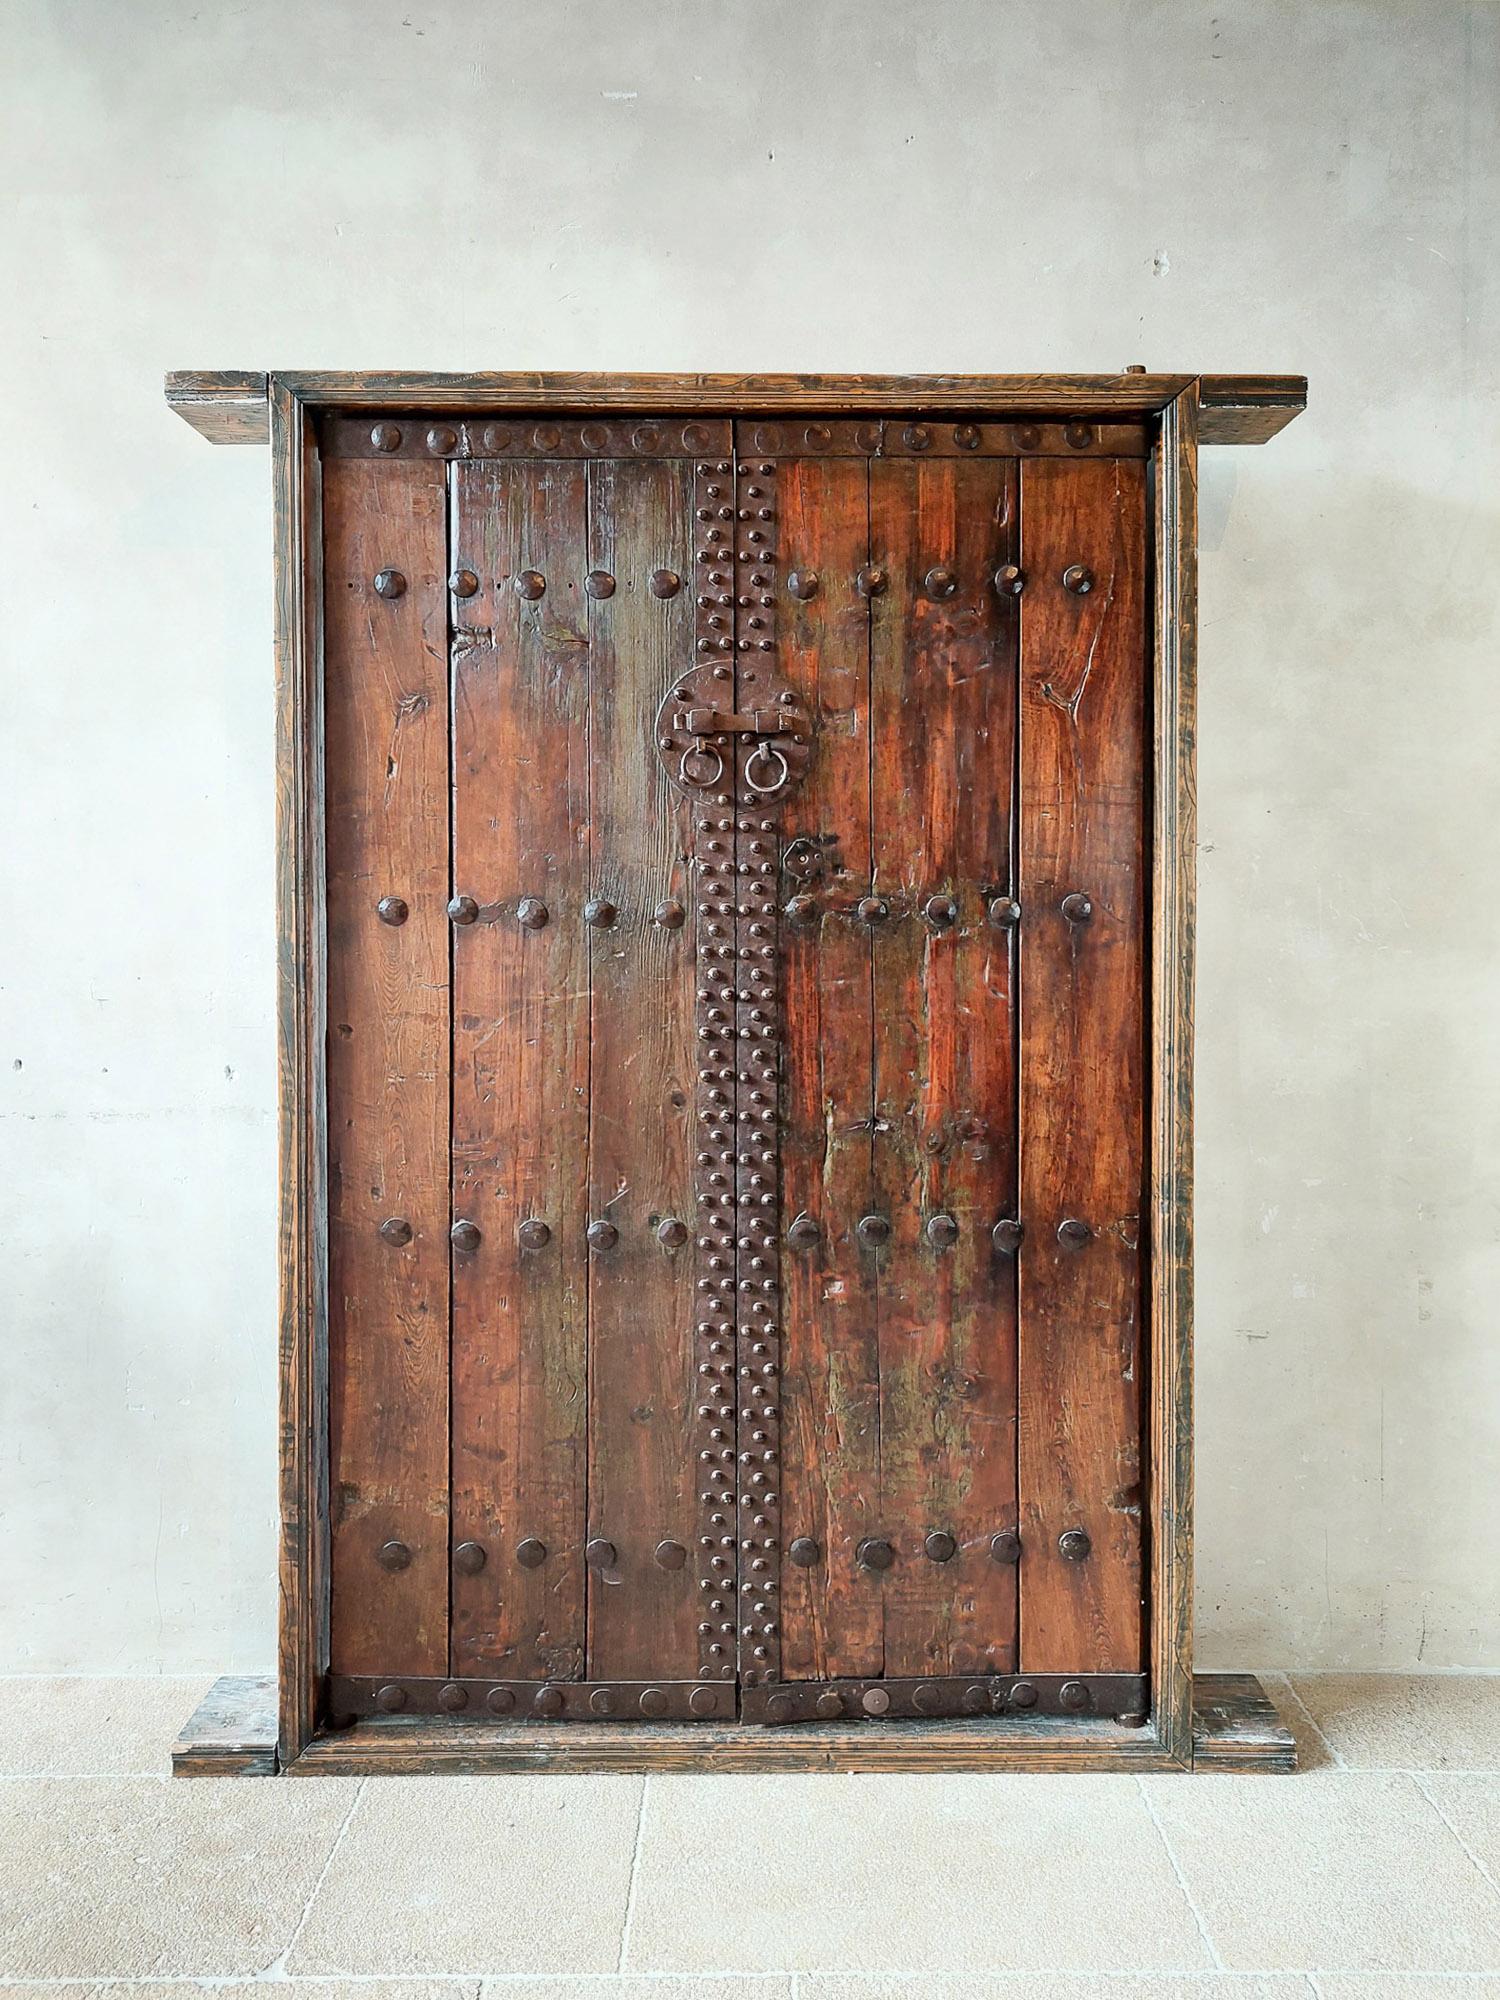 A pair of 17th century Spanish Cortijo wooden doors with doorframe. These antique pine doors in spanish or mexican finca style with wrought iron studs have been completely restored by the previous private owner: the doors have been made wider and